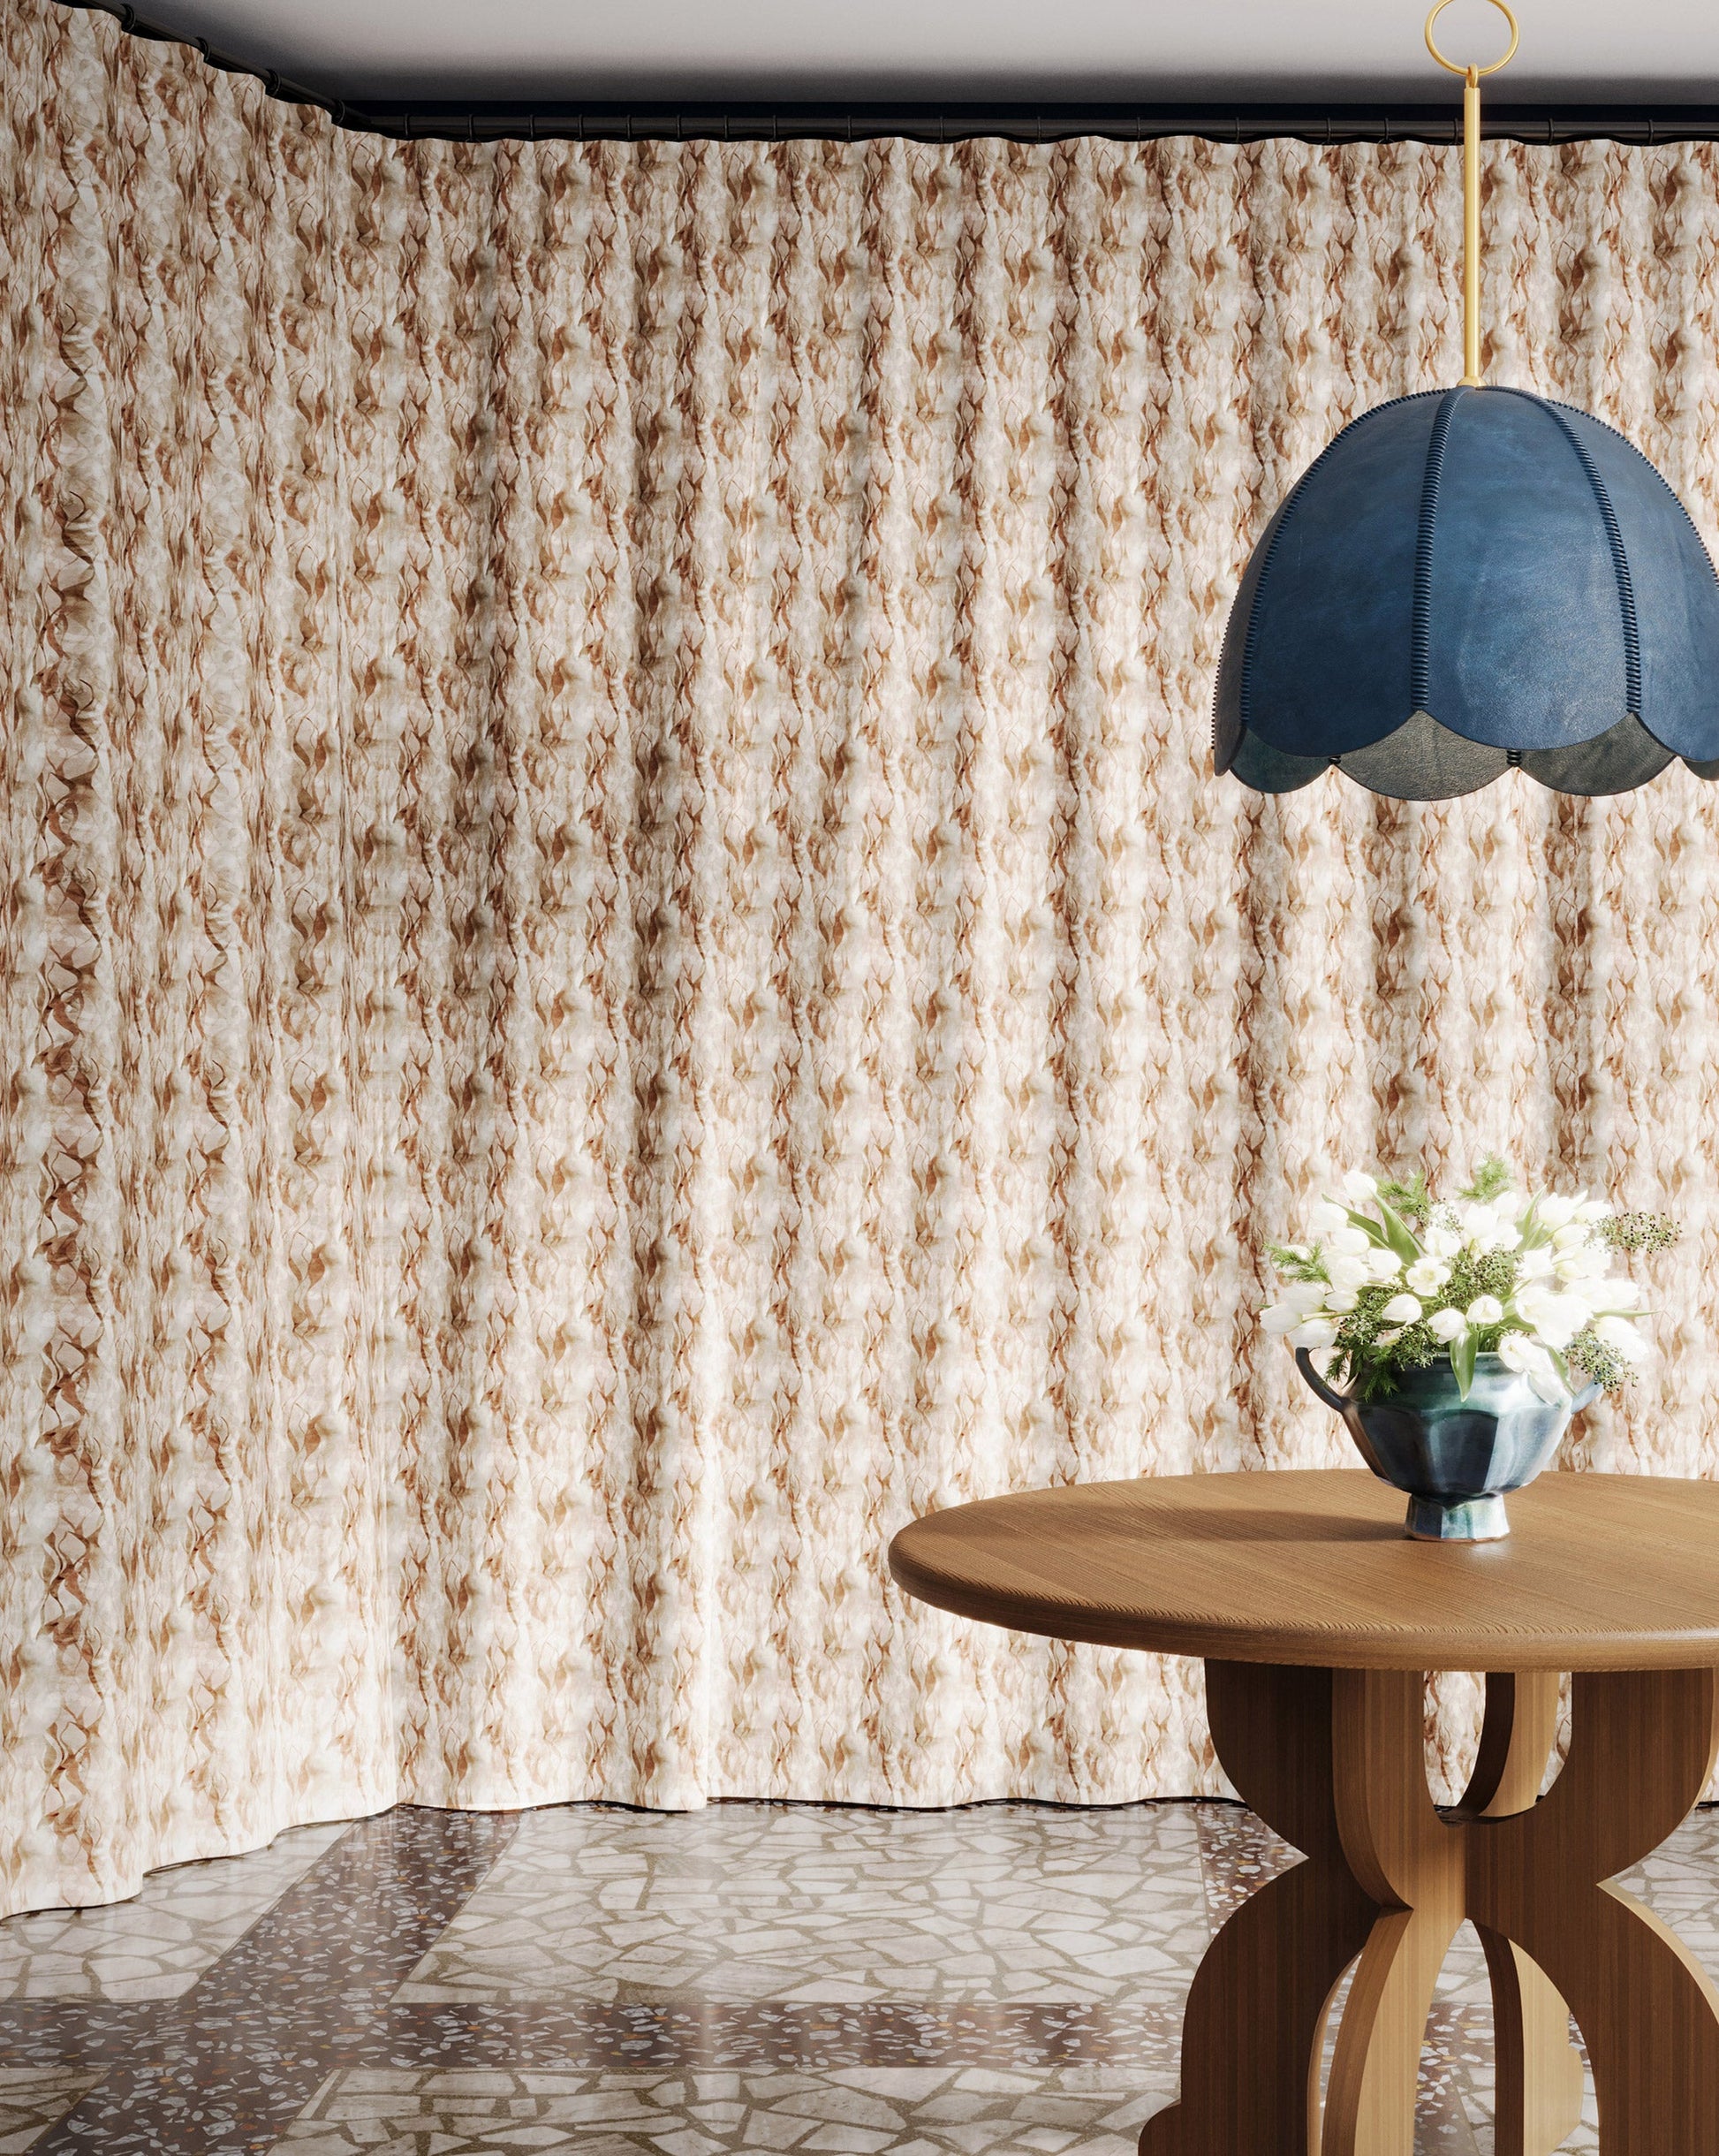 Cascade Garnet fabric in a brown and beige toned pattern used as curtains in a dining room.